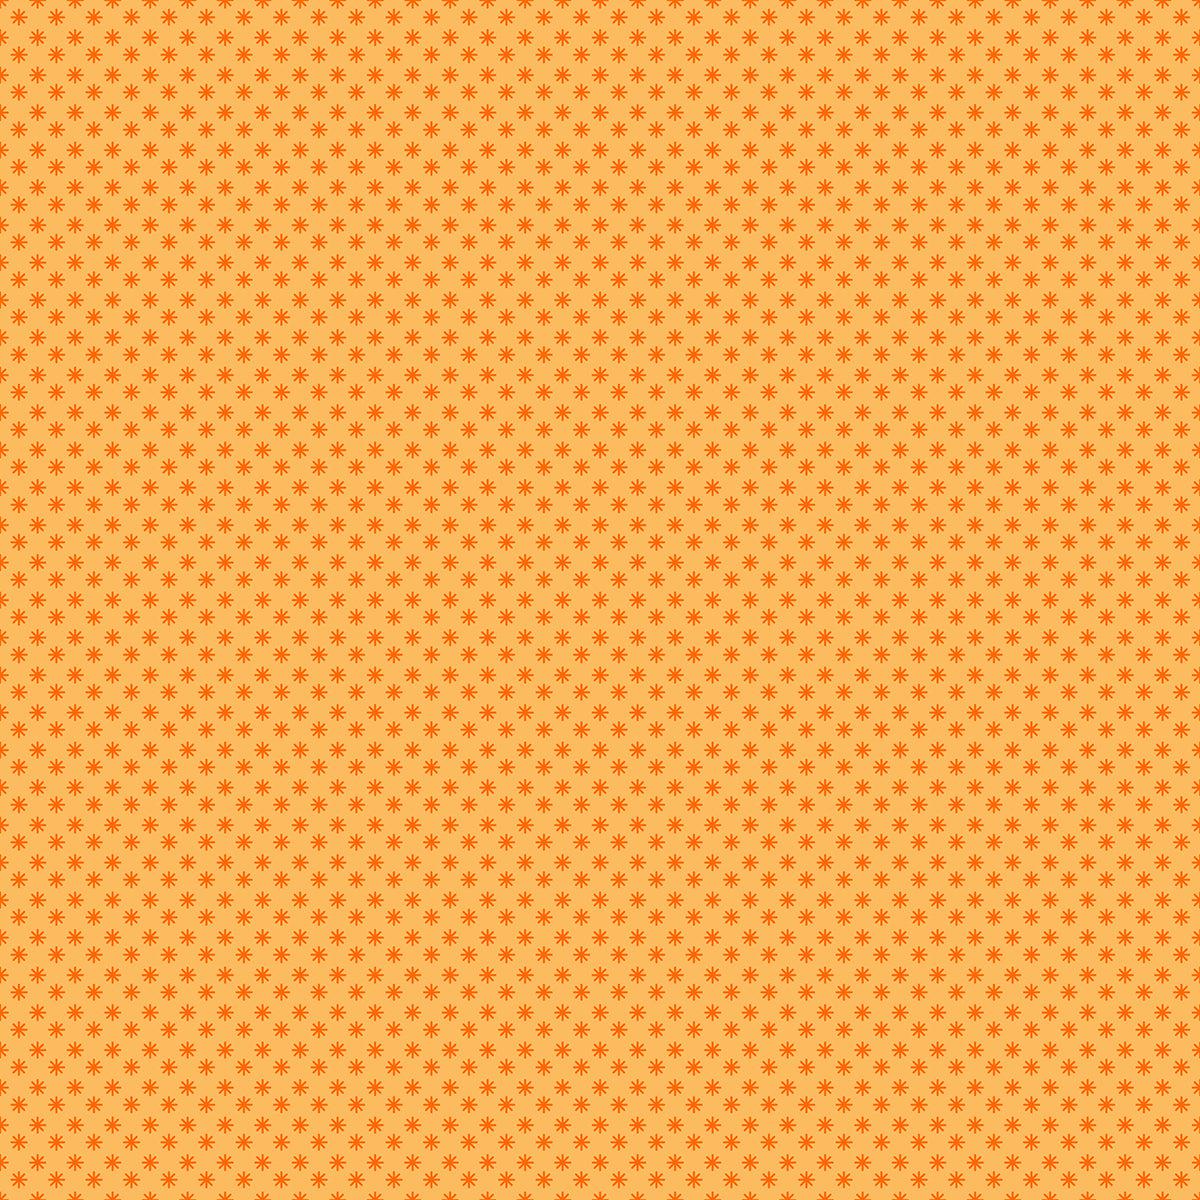 Ruby Star Society-Puff Cantaloupe-fabric-gather here online